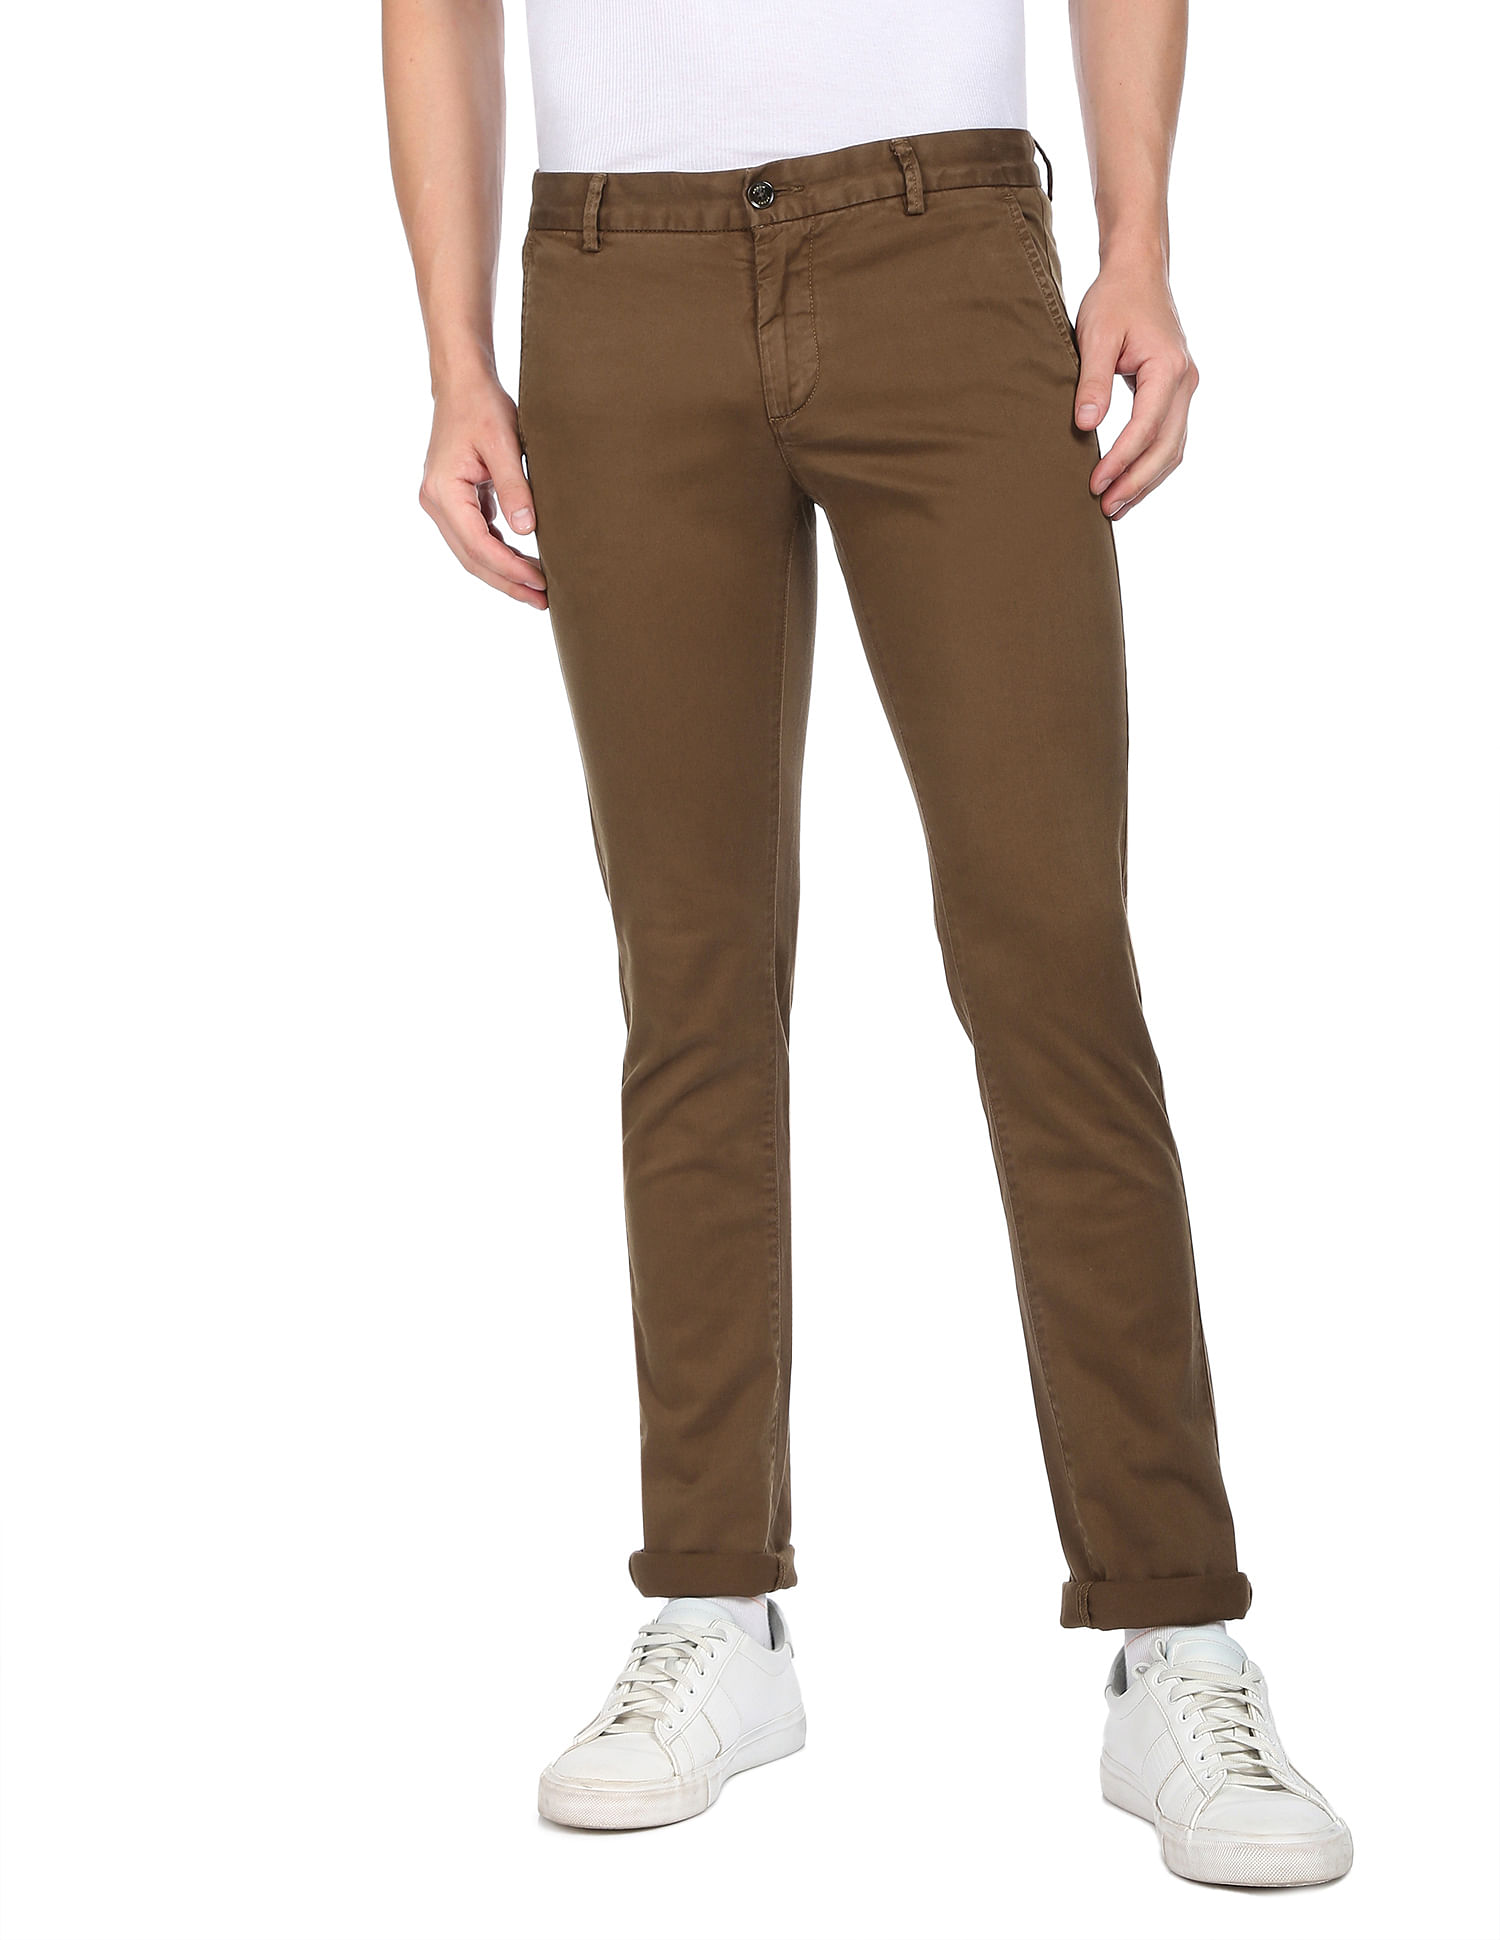 Mens Stone Chinos | Chinos by Paul Brown